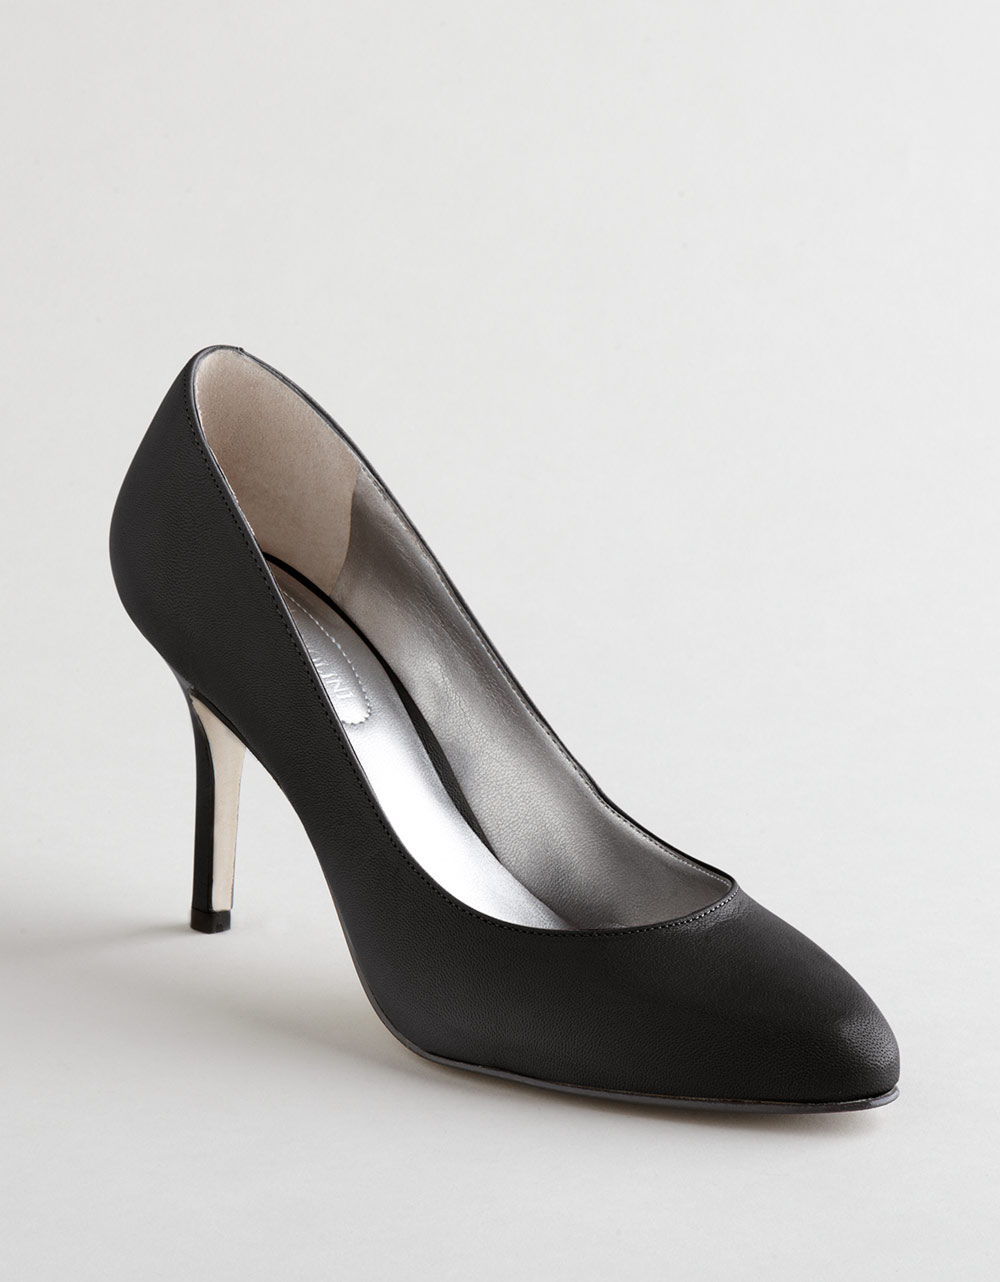 Enzo Angiolini Joia Pumps in Black (black leather) | Lyst